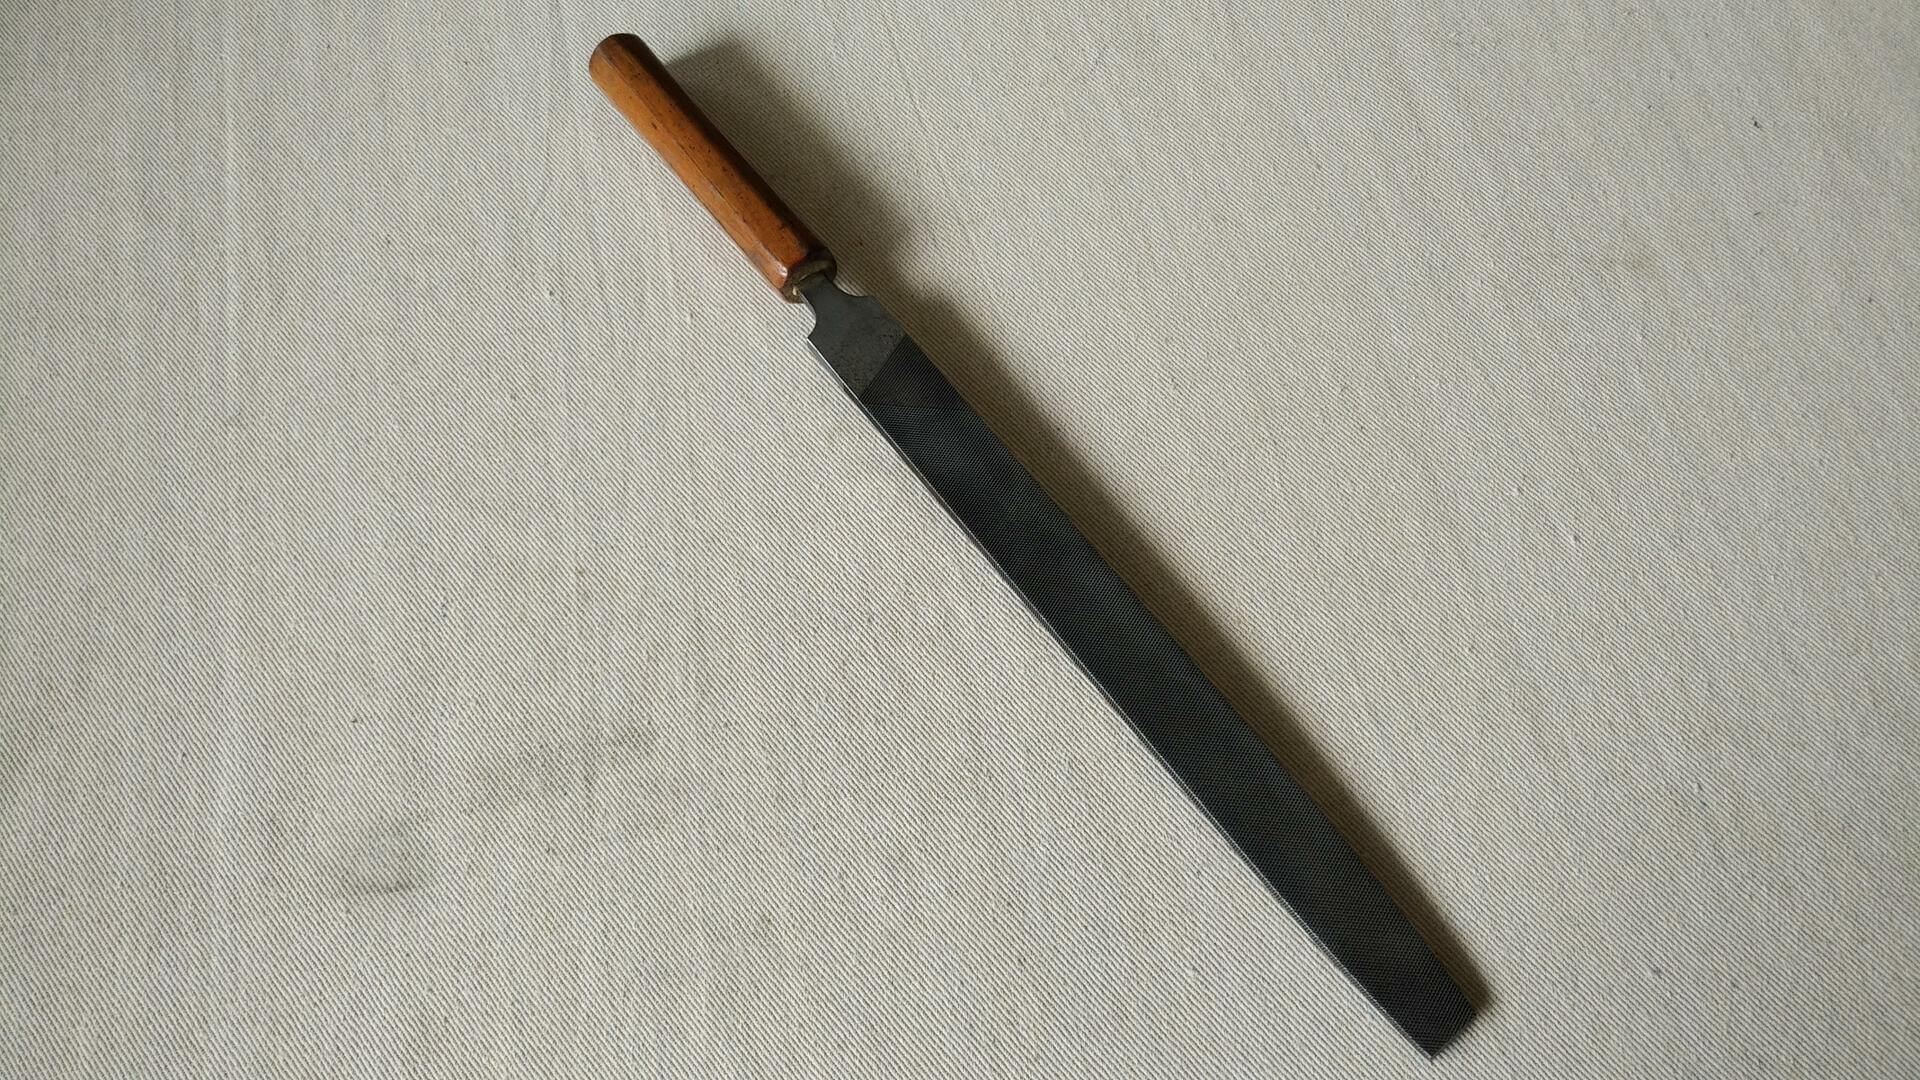 Rare antique Peter S. Stubs Limited bastard file with octagonal hardwood handle. Vintage made in England collectible metalworking & machinist hand tools